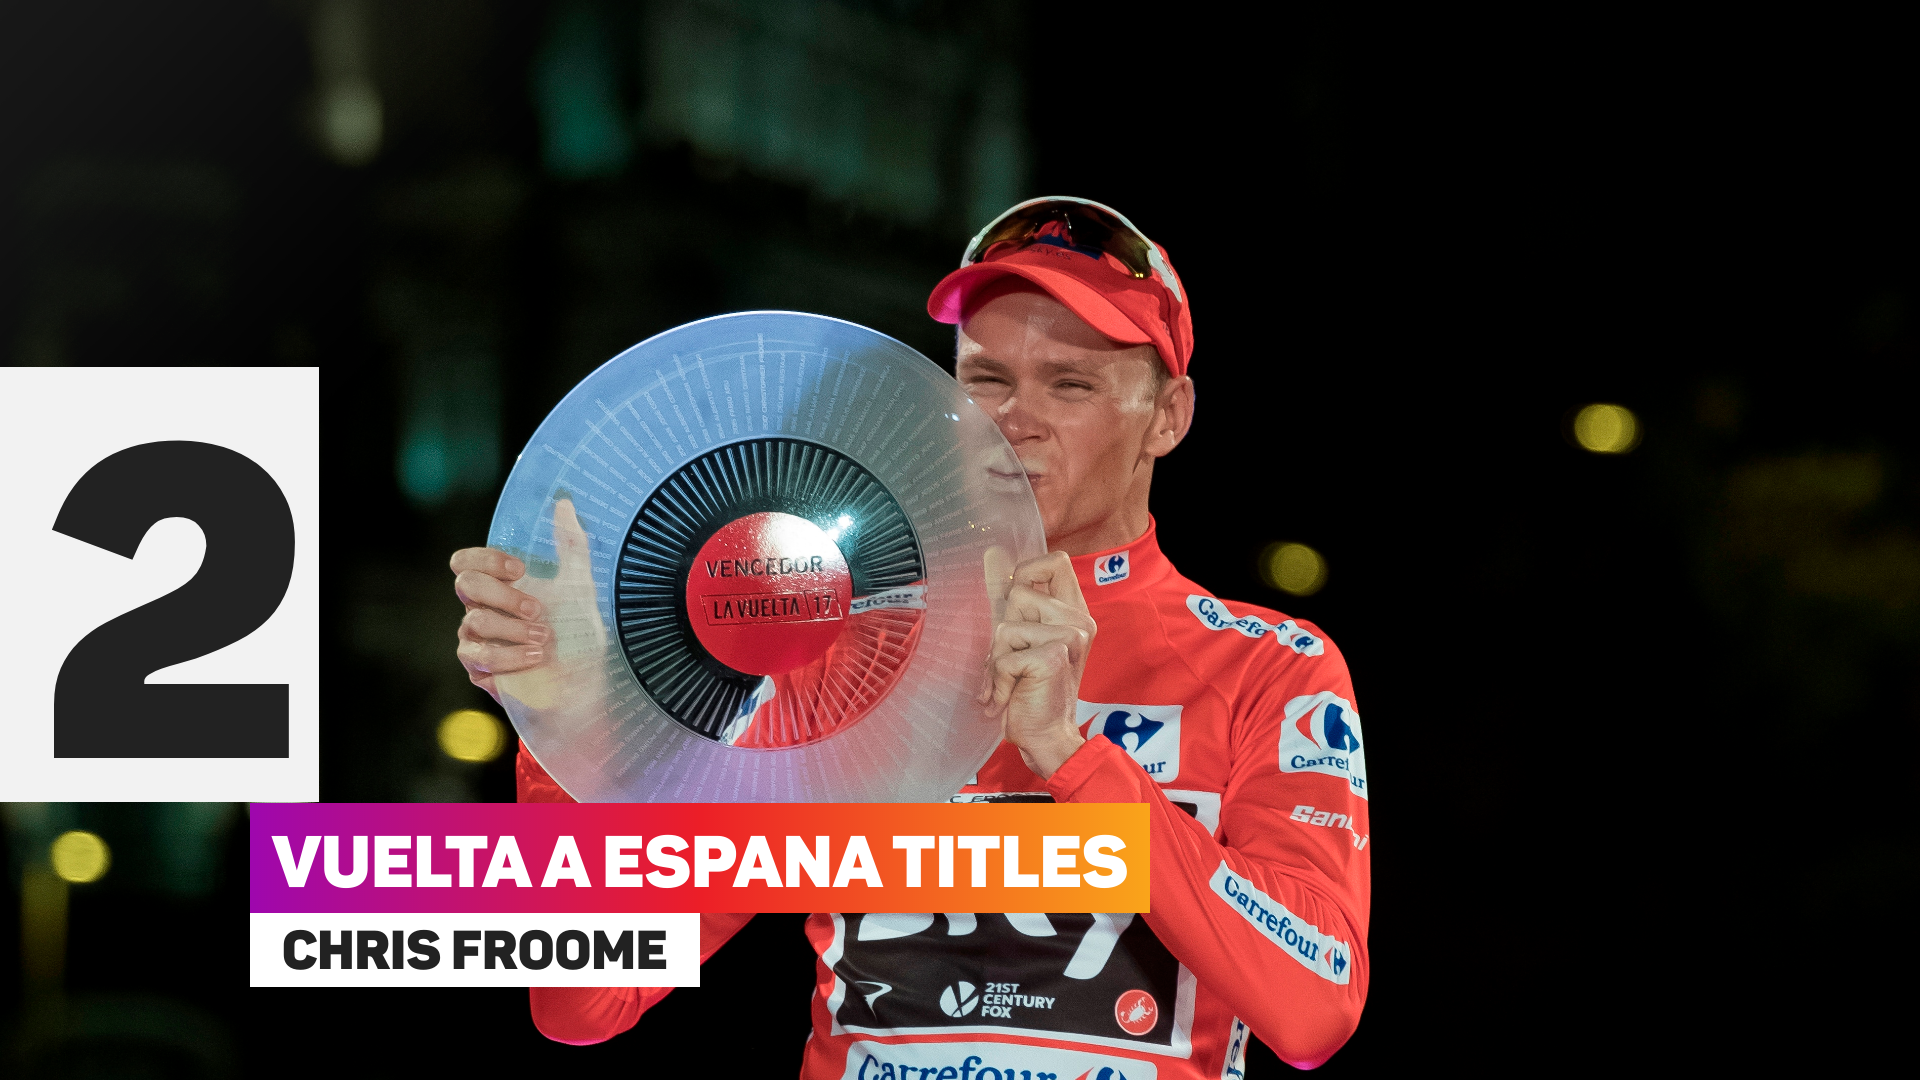 Chris Froome has triumphed twice at the Vuelta